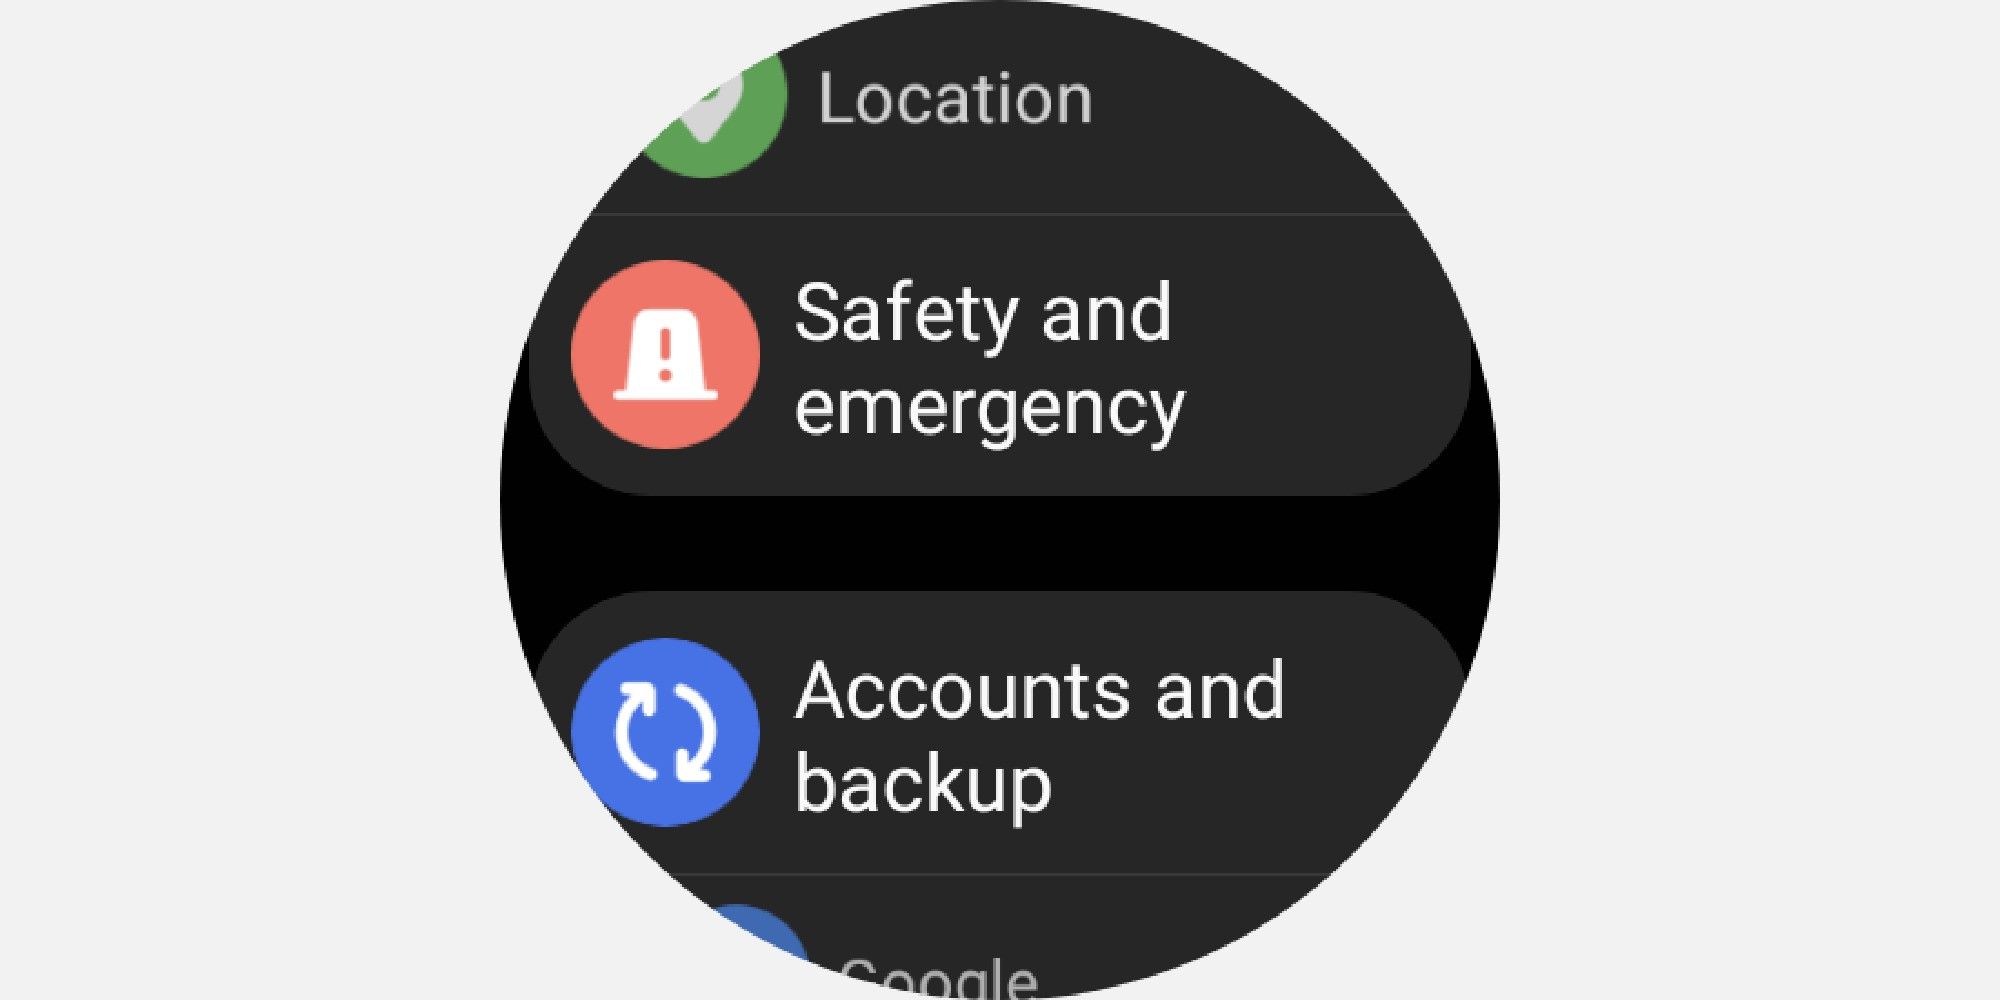 Setting up accounts and backups on your smartwatch